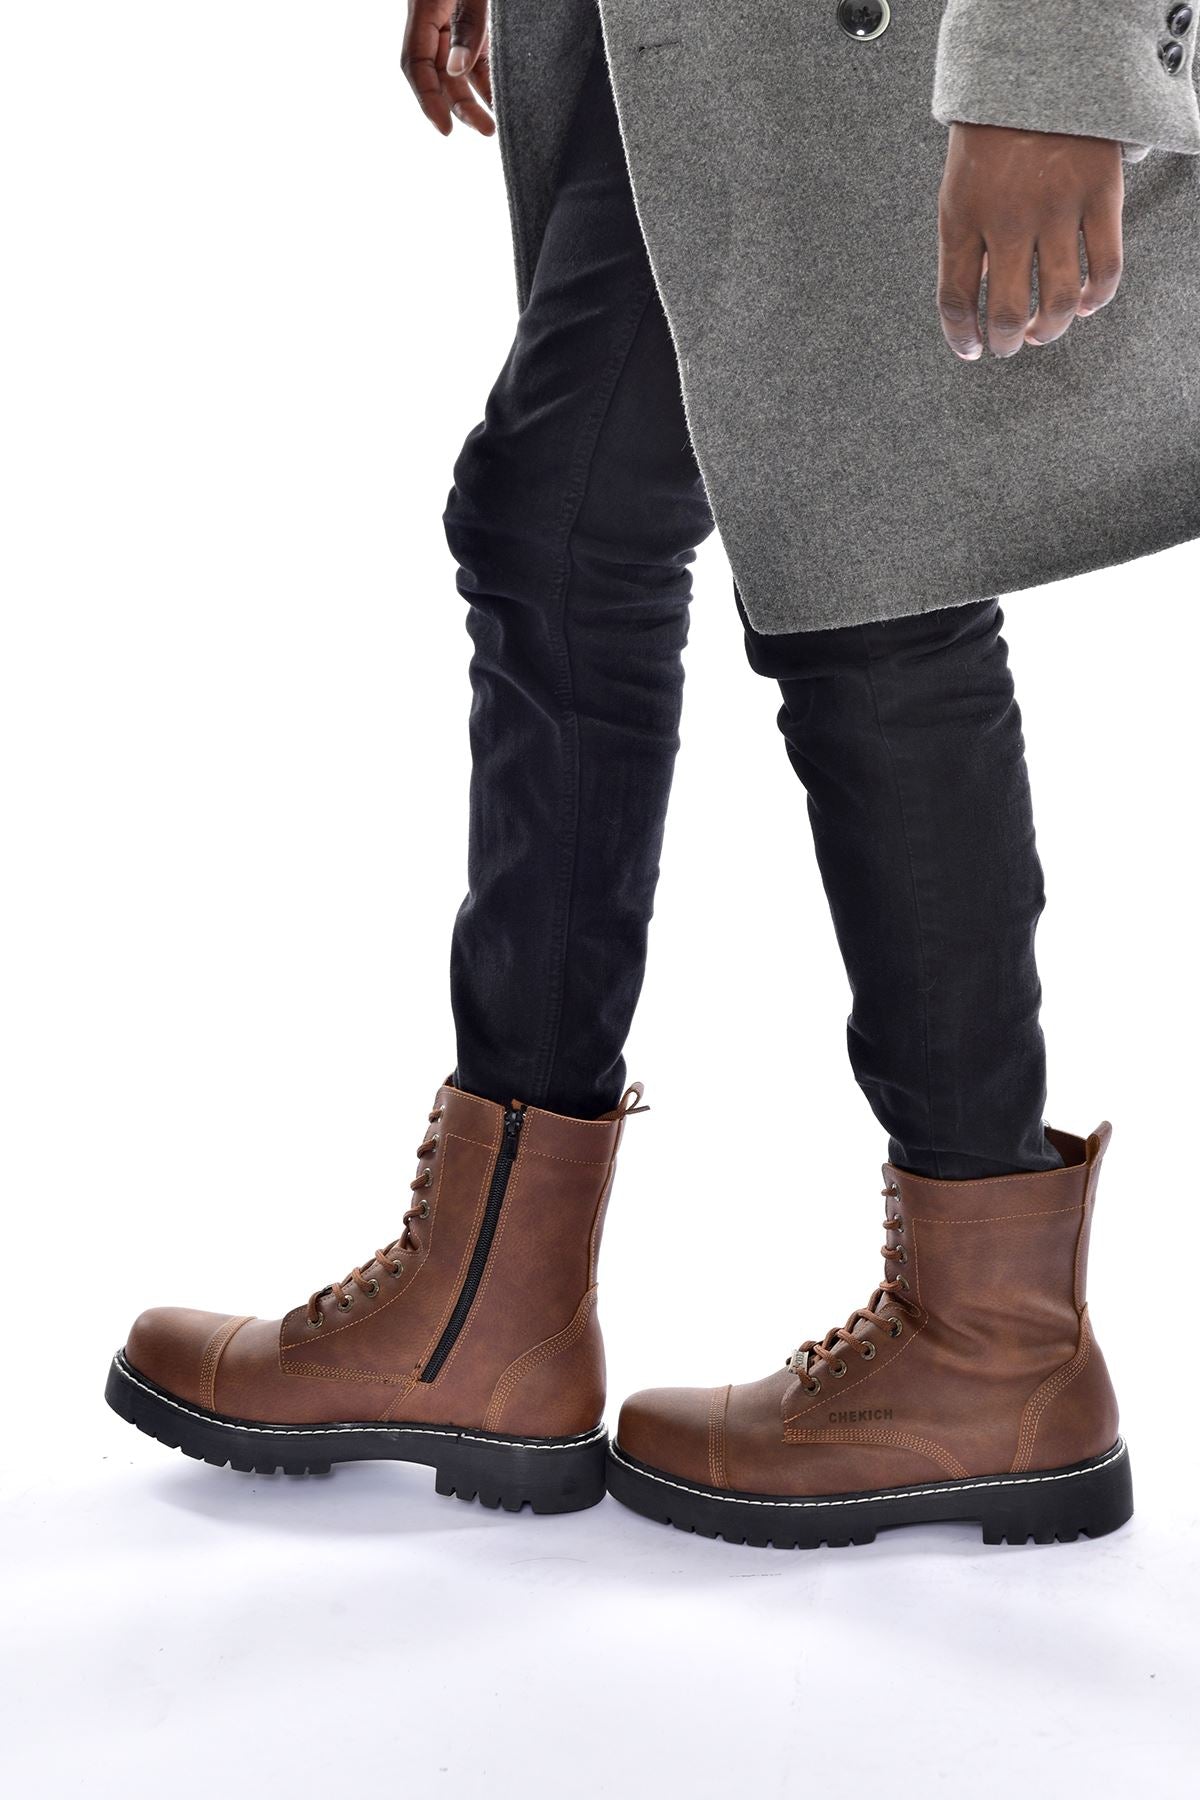 CH009 Men's Leather Brown-Black Sole Casual Winter Boots - STREETMODE ™